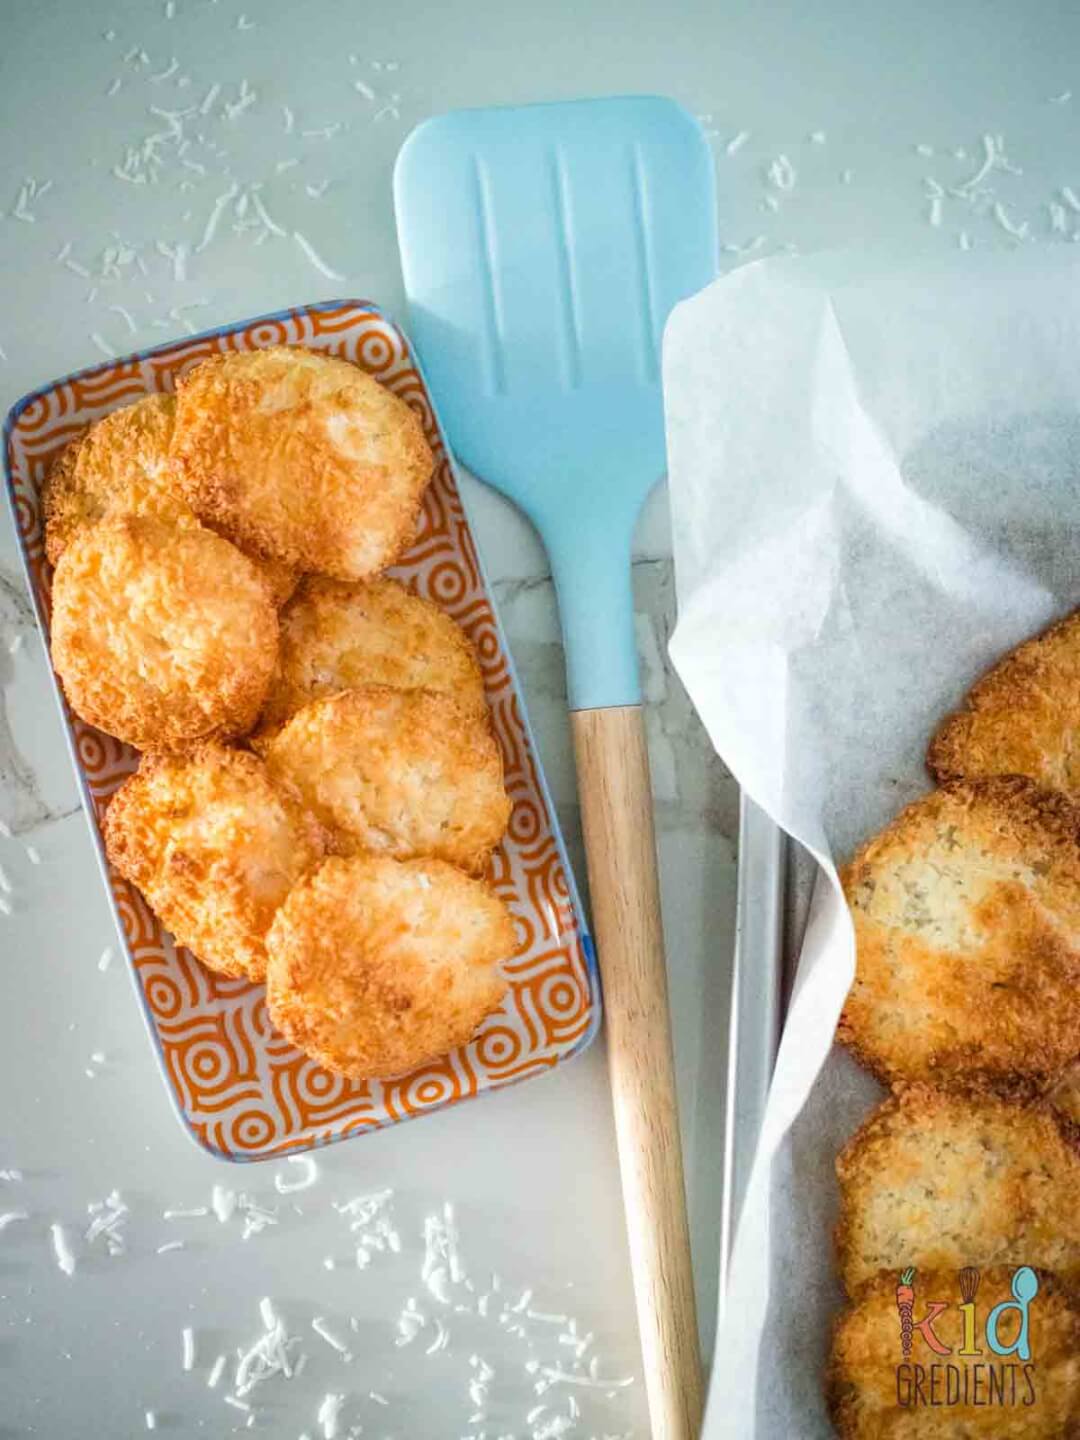 Coconut macaroons on a plate. Blue spatula